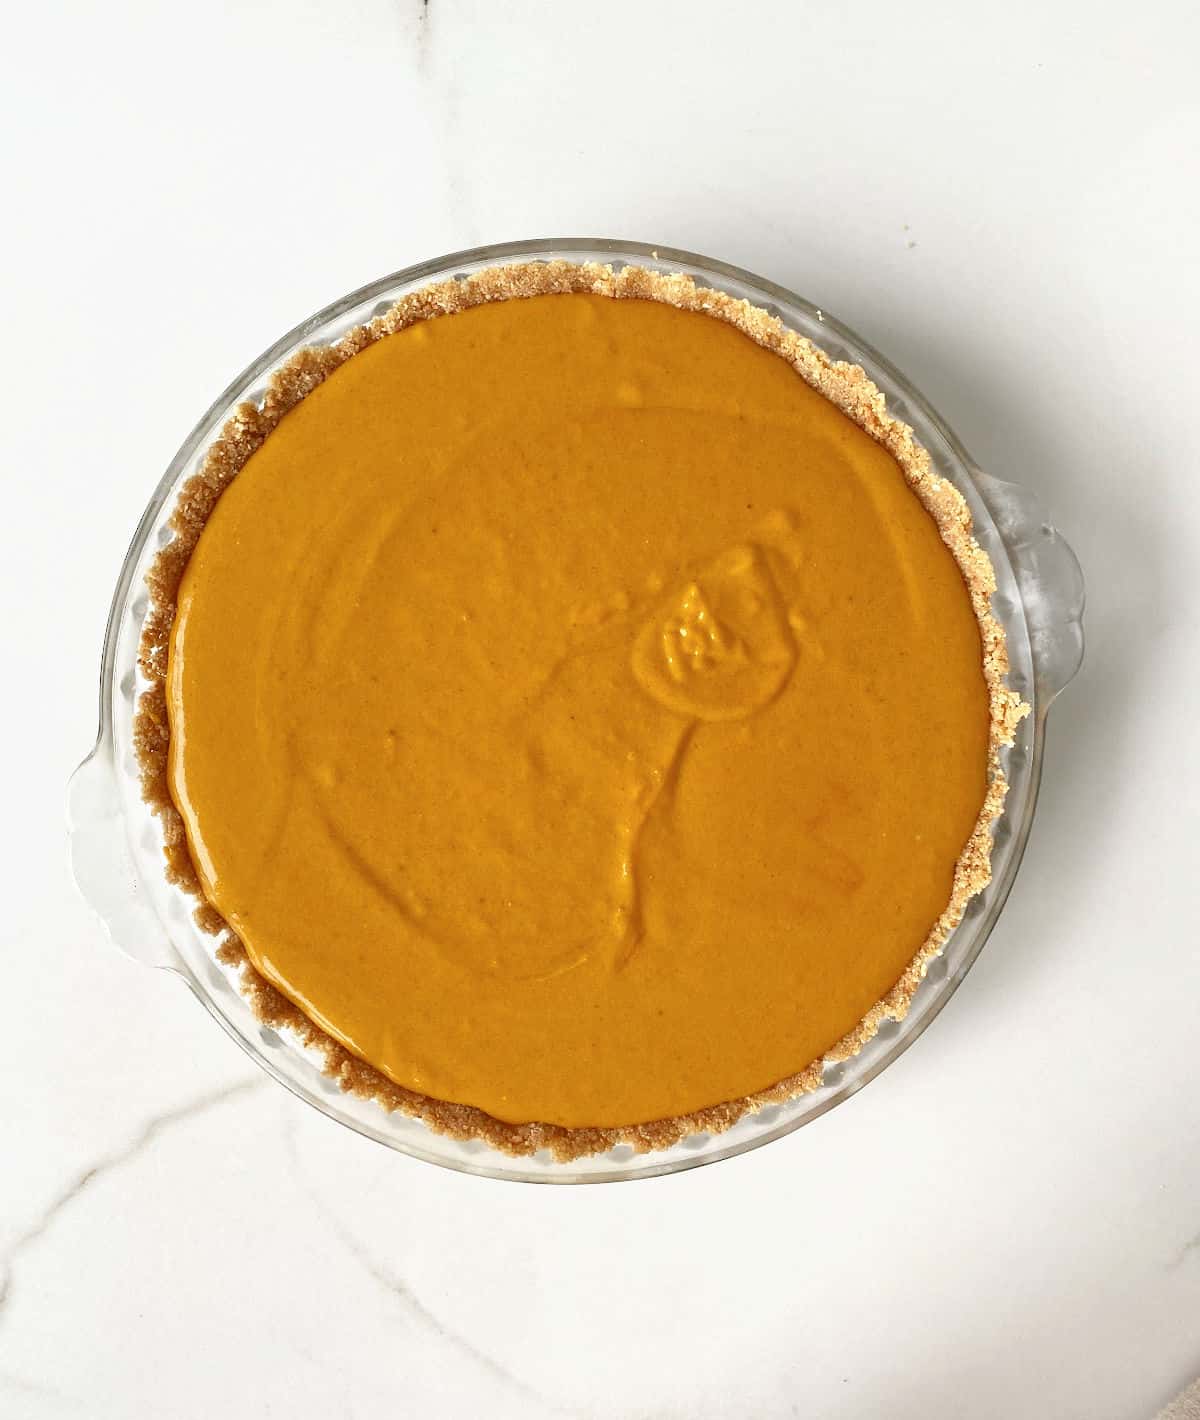 White marble surface with unbaked pumpkin pie on a glass dish. 